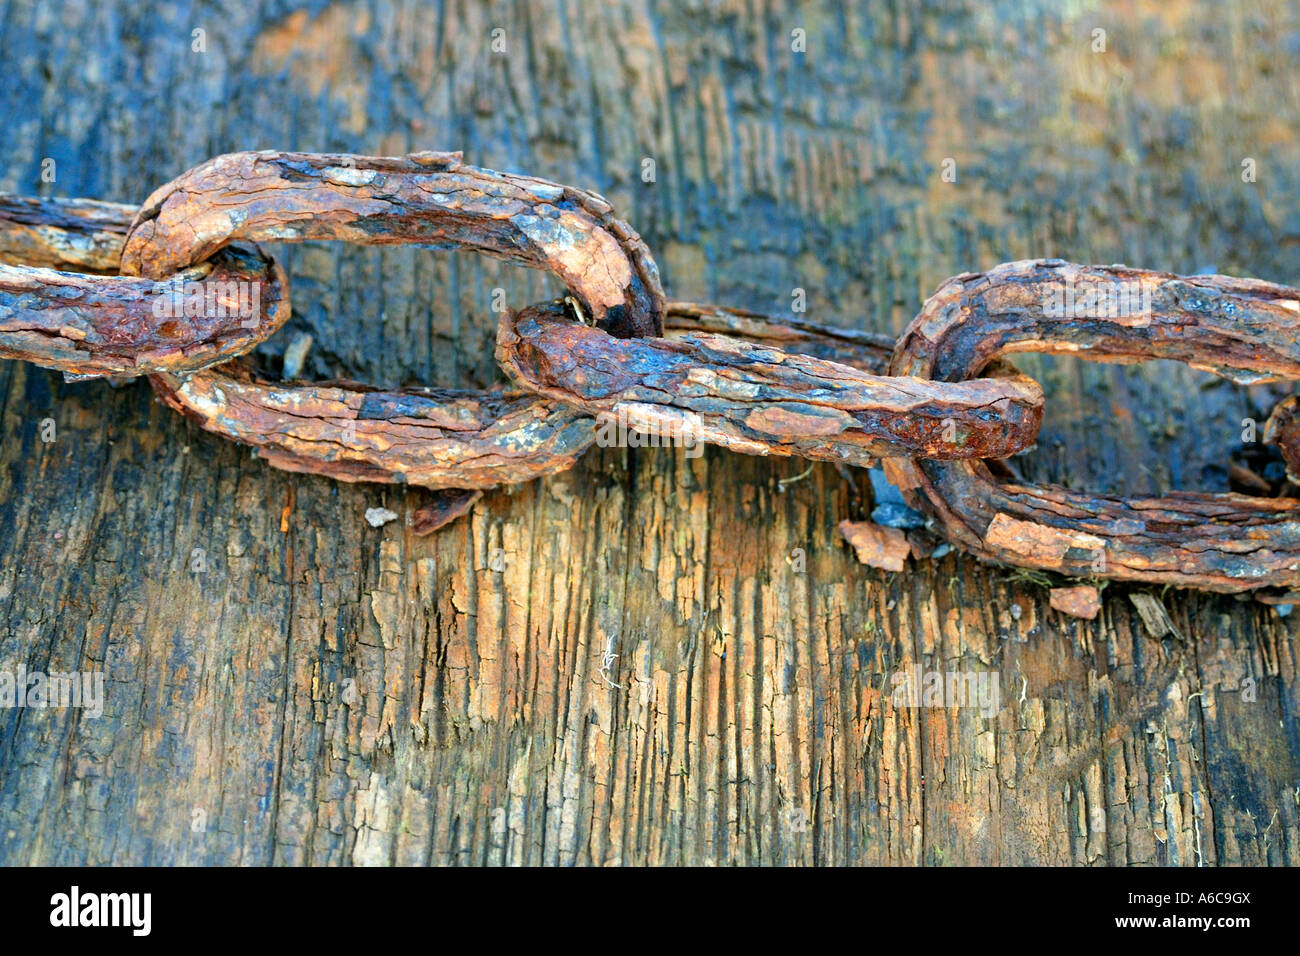 Very heavily corroded metal chain wrapped tightly around a large wooden beam previously used as a pier support Stock Photo